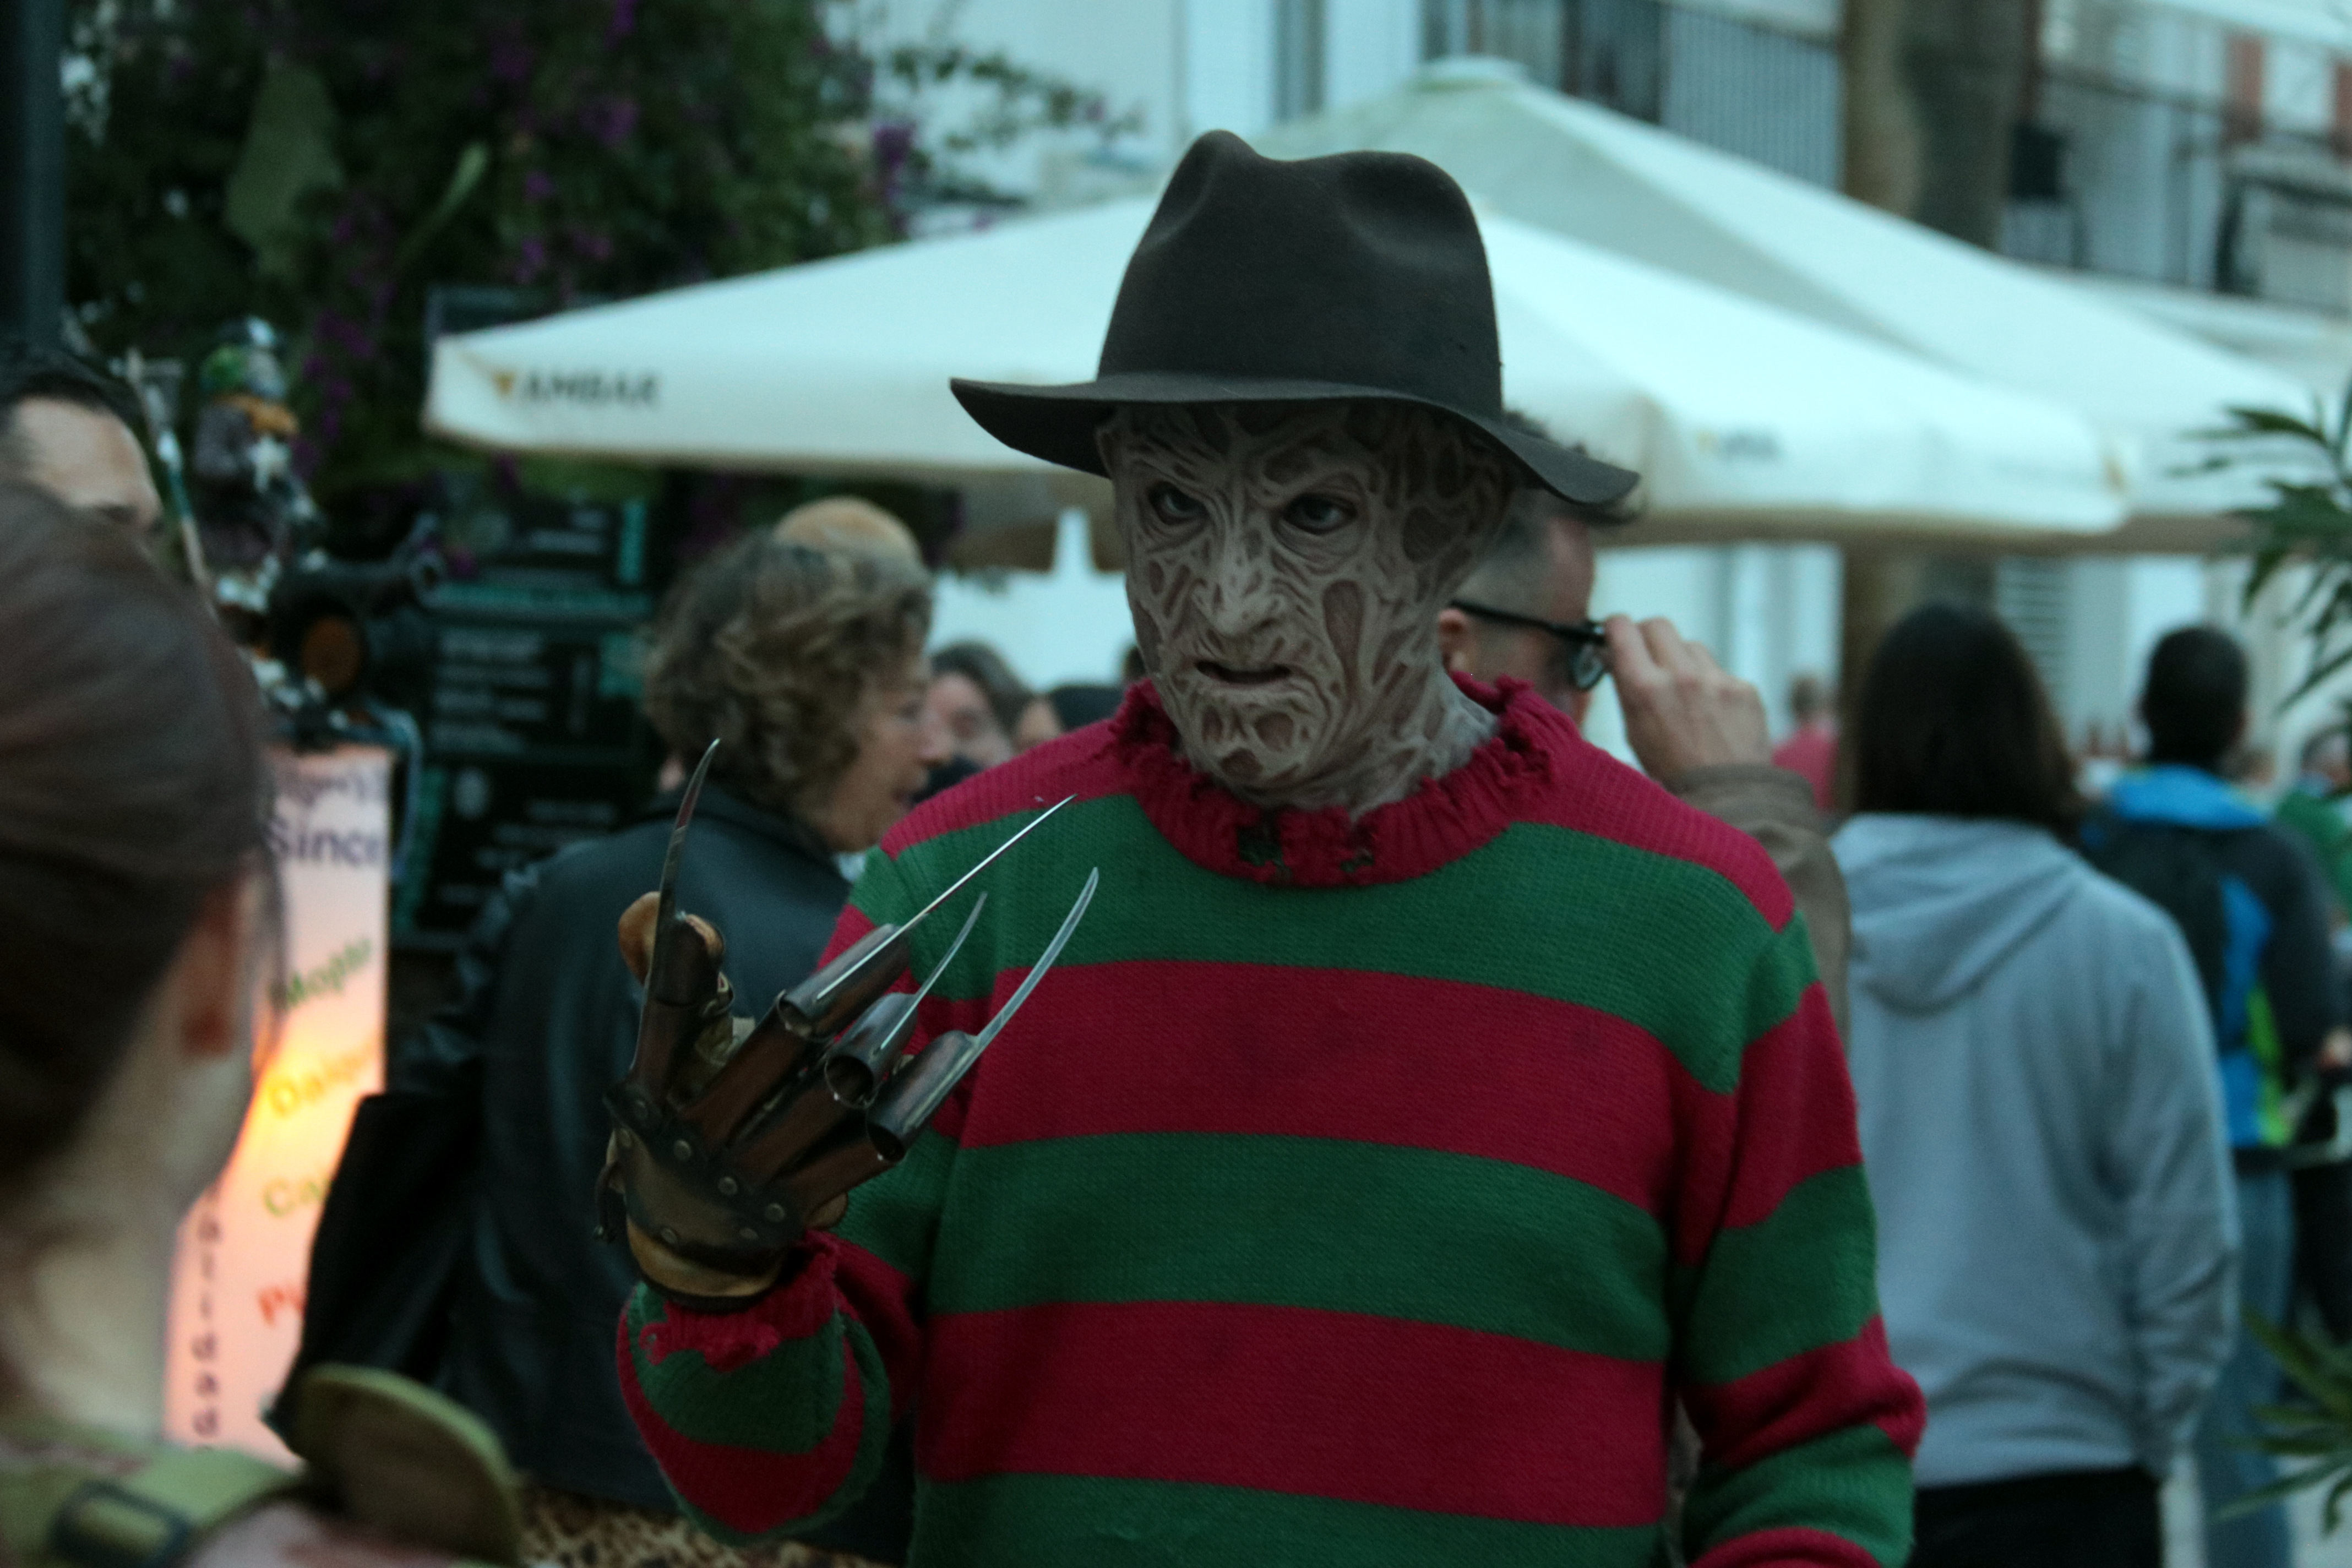 A man dressed as Freddy Krueger just before the parade starts